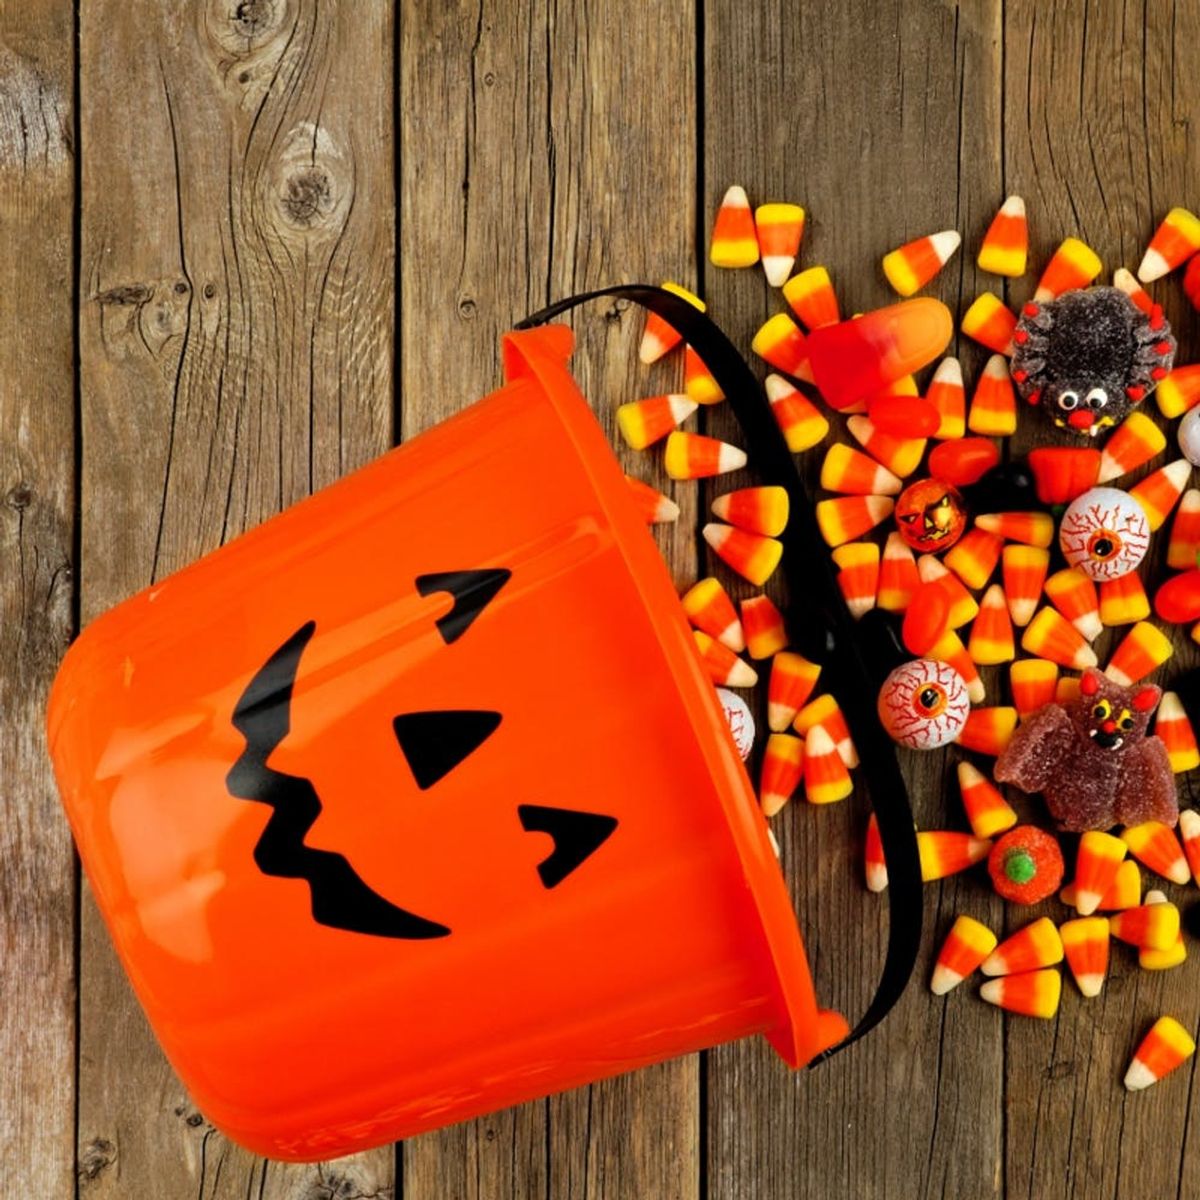 5 Nutritionist-Approved Halloween Treats